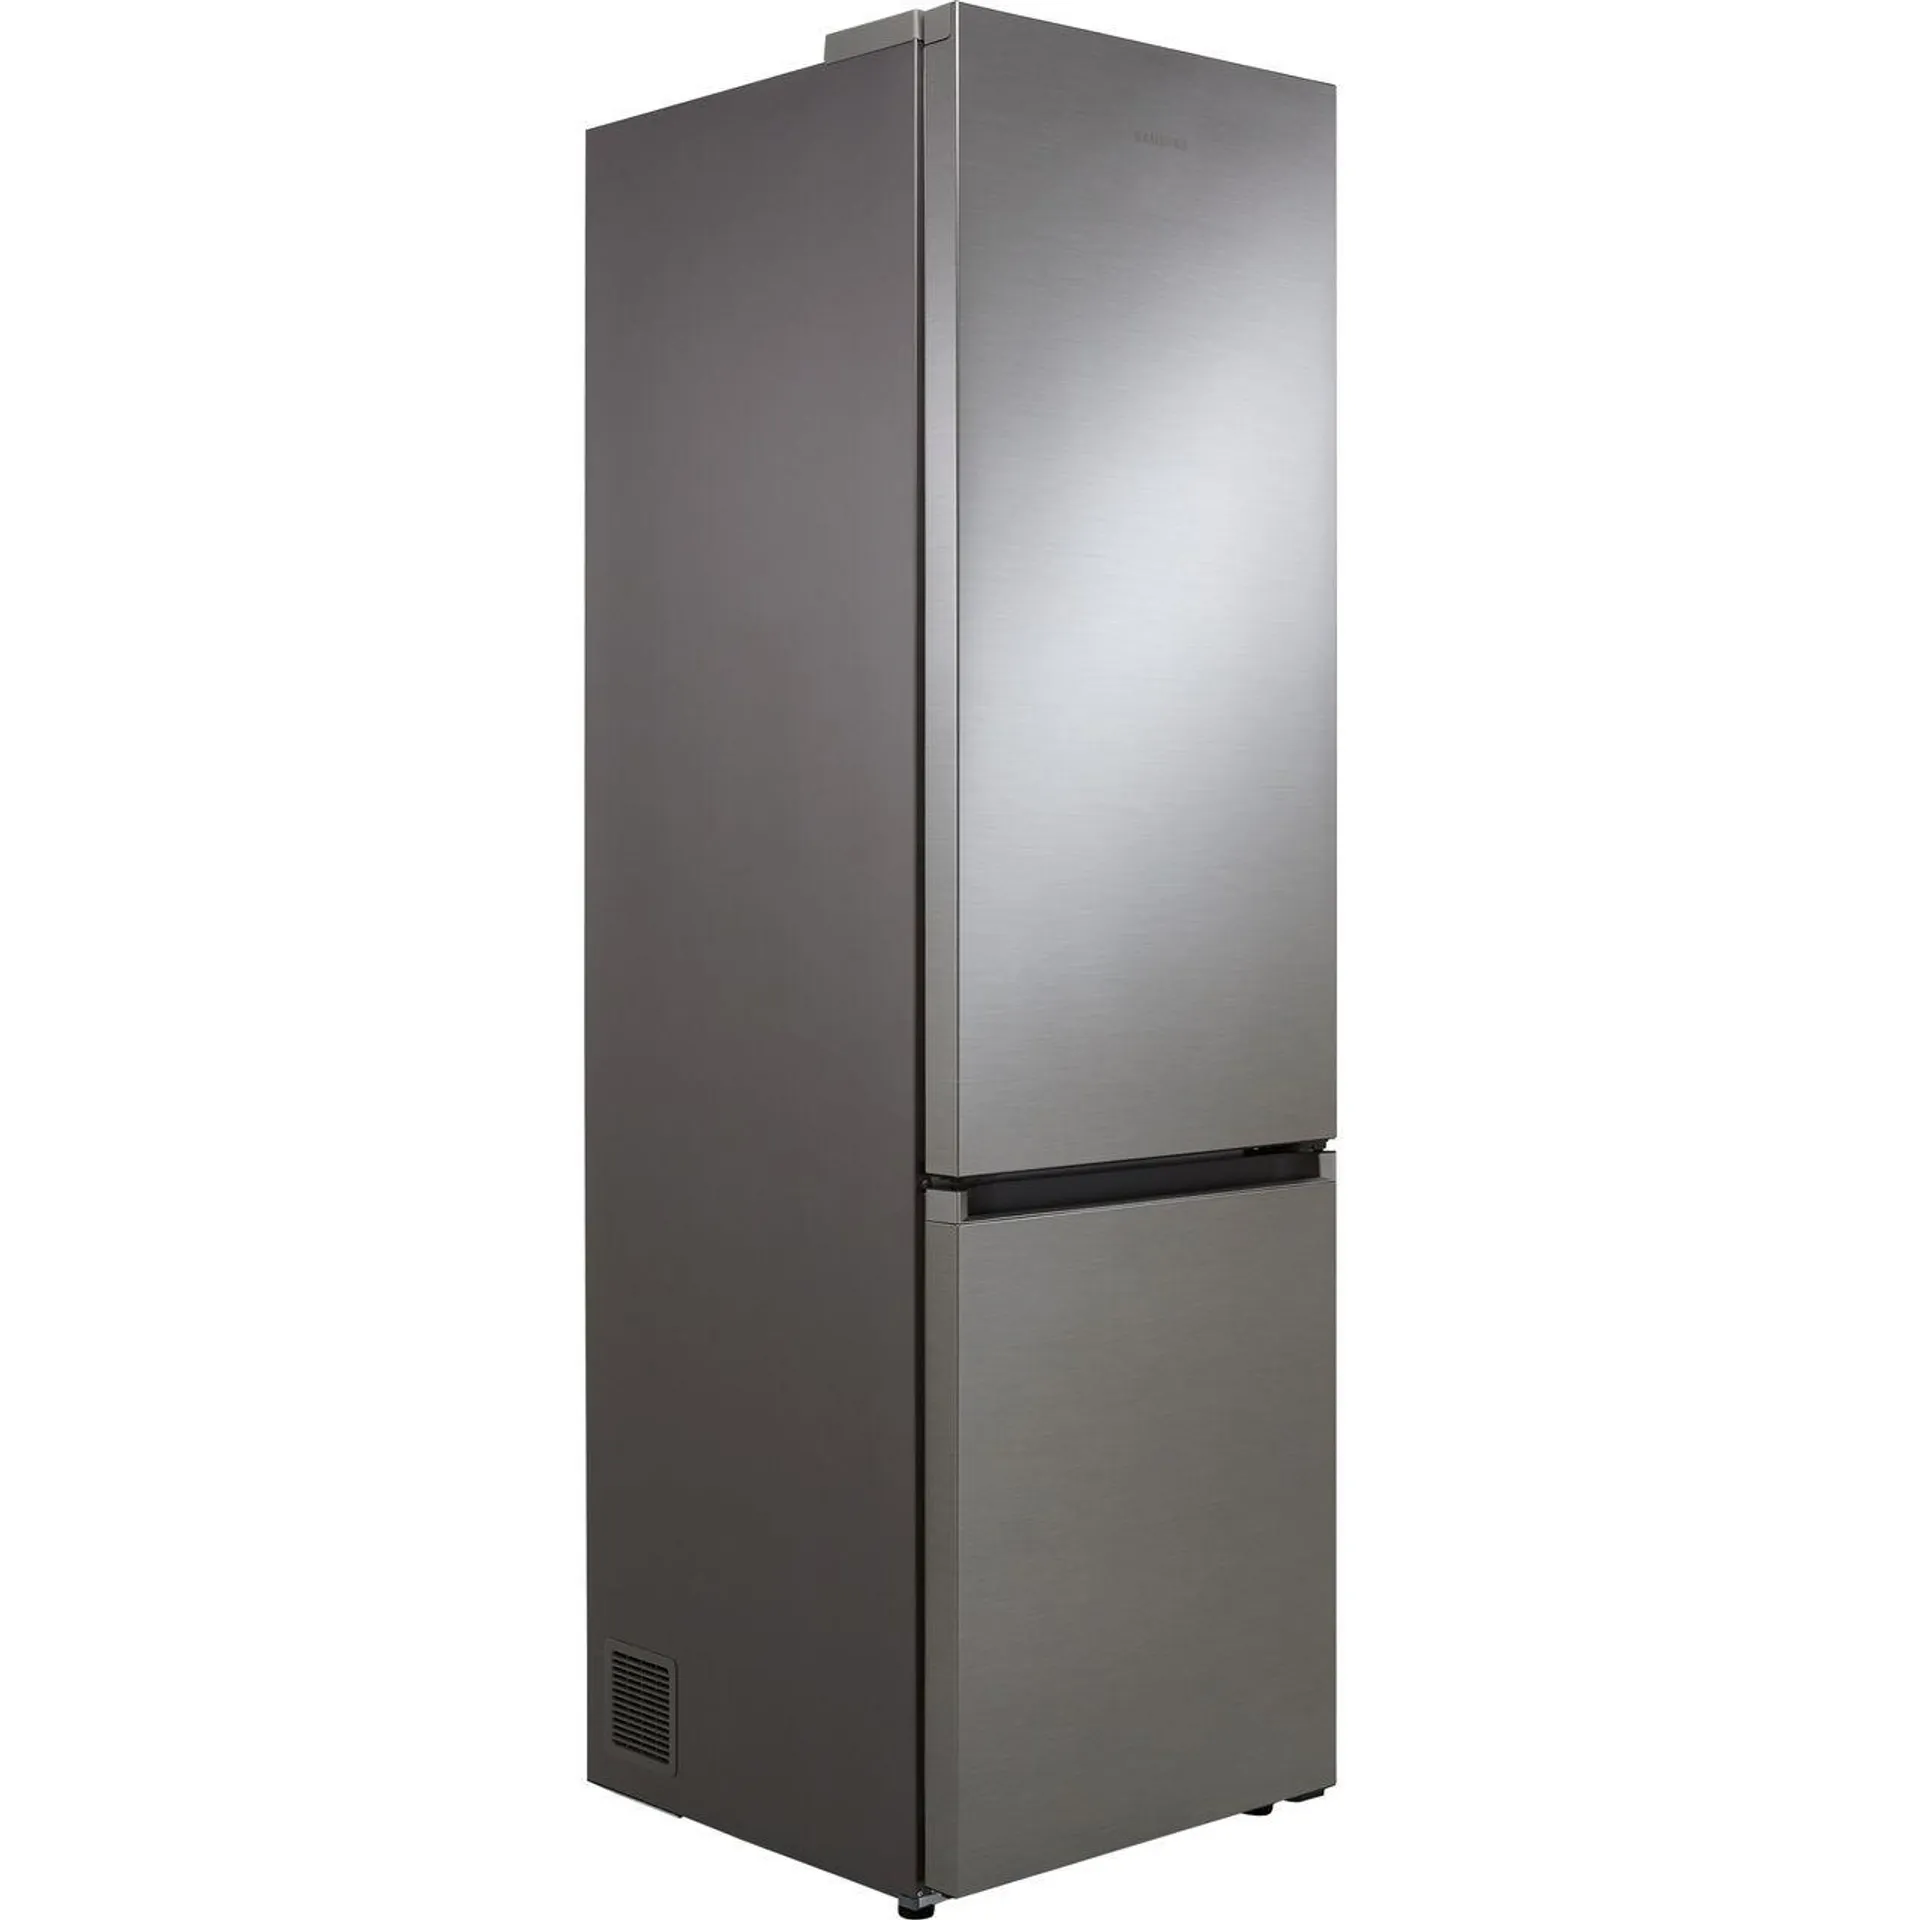 Samsung Series 5 RB38T602CS9 70/30 Total No Frost Fridge Freezer - Silver - C Rated